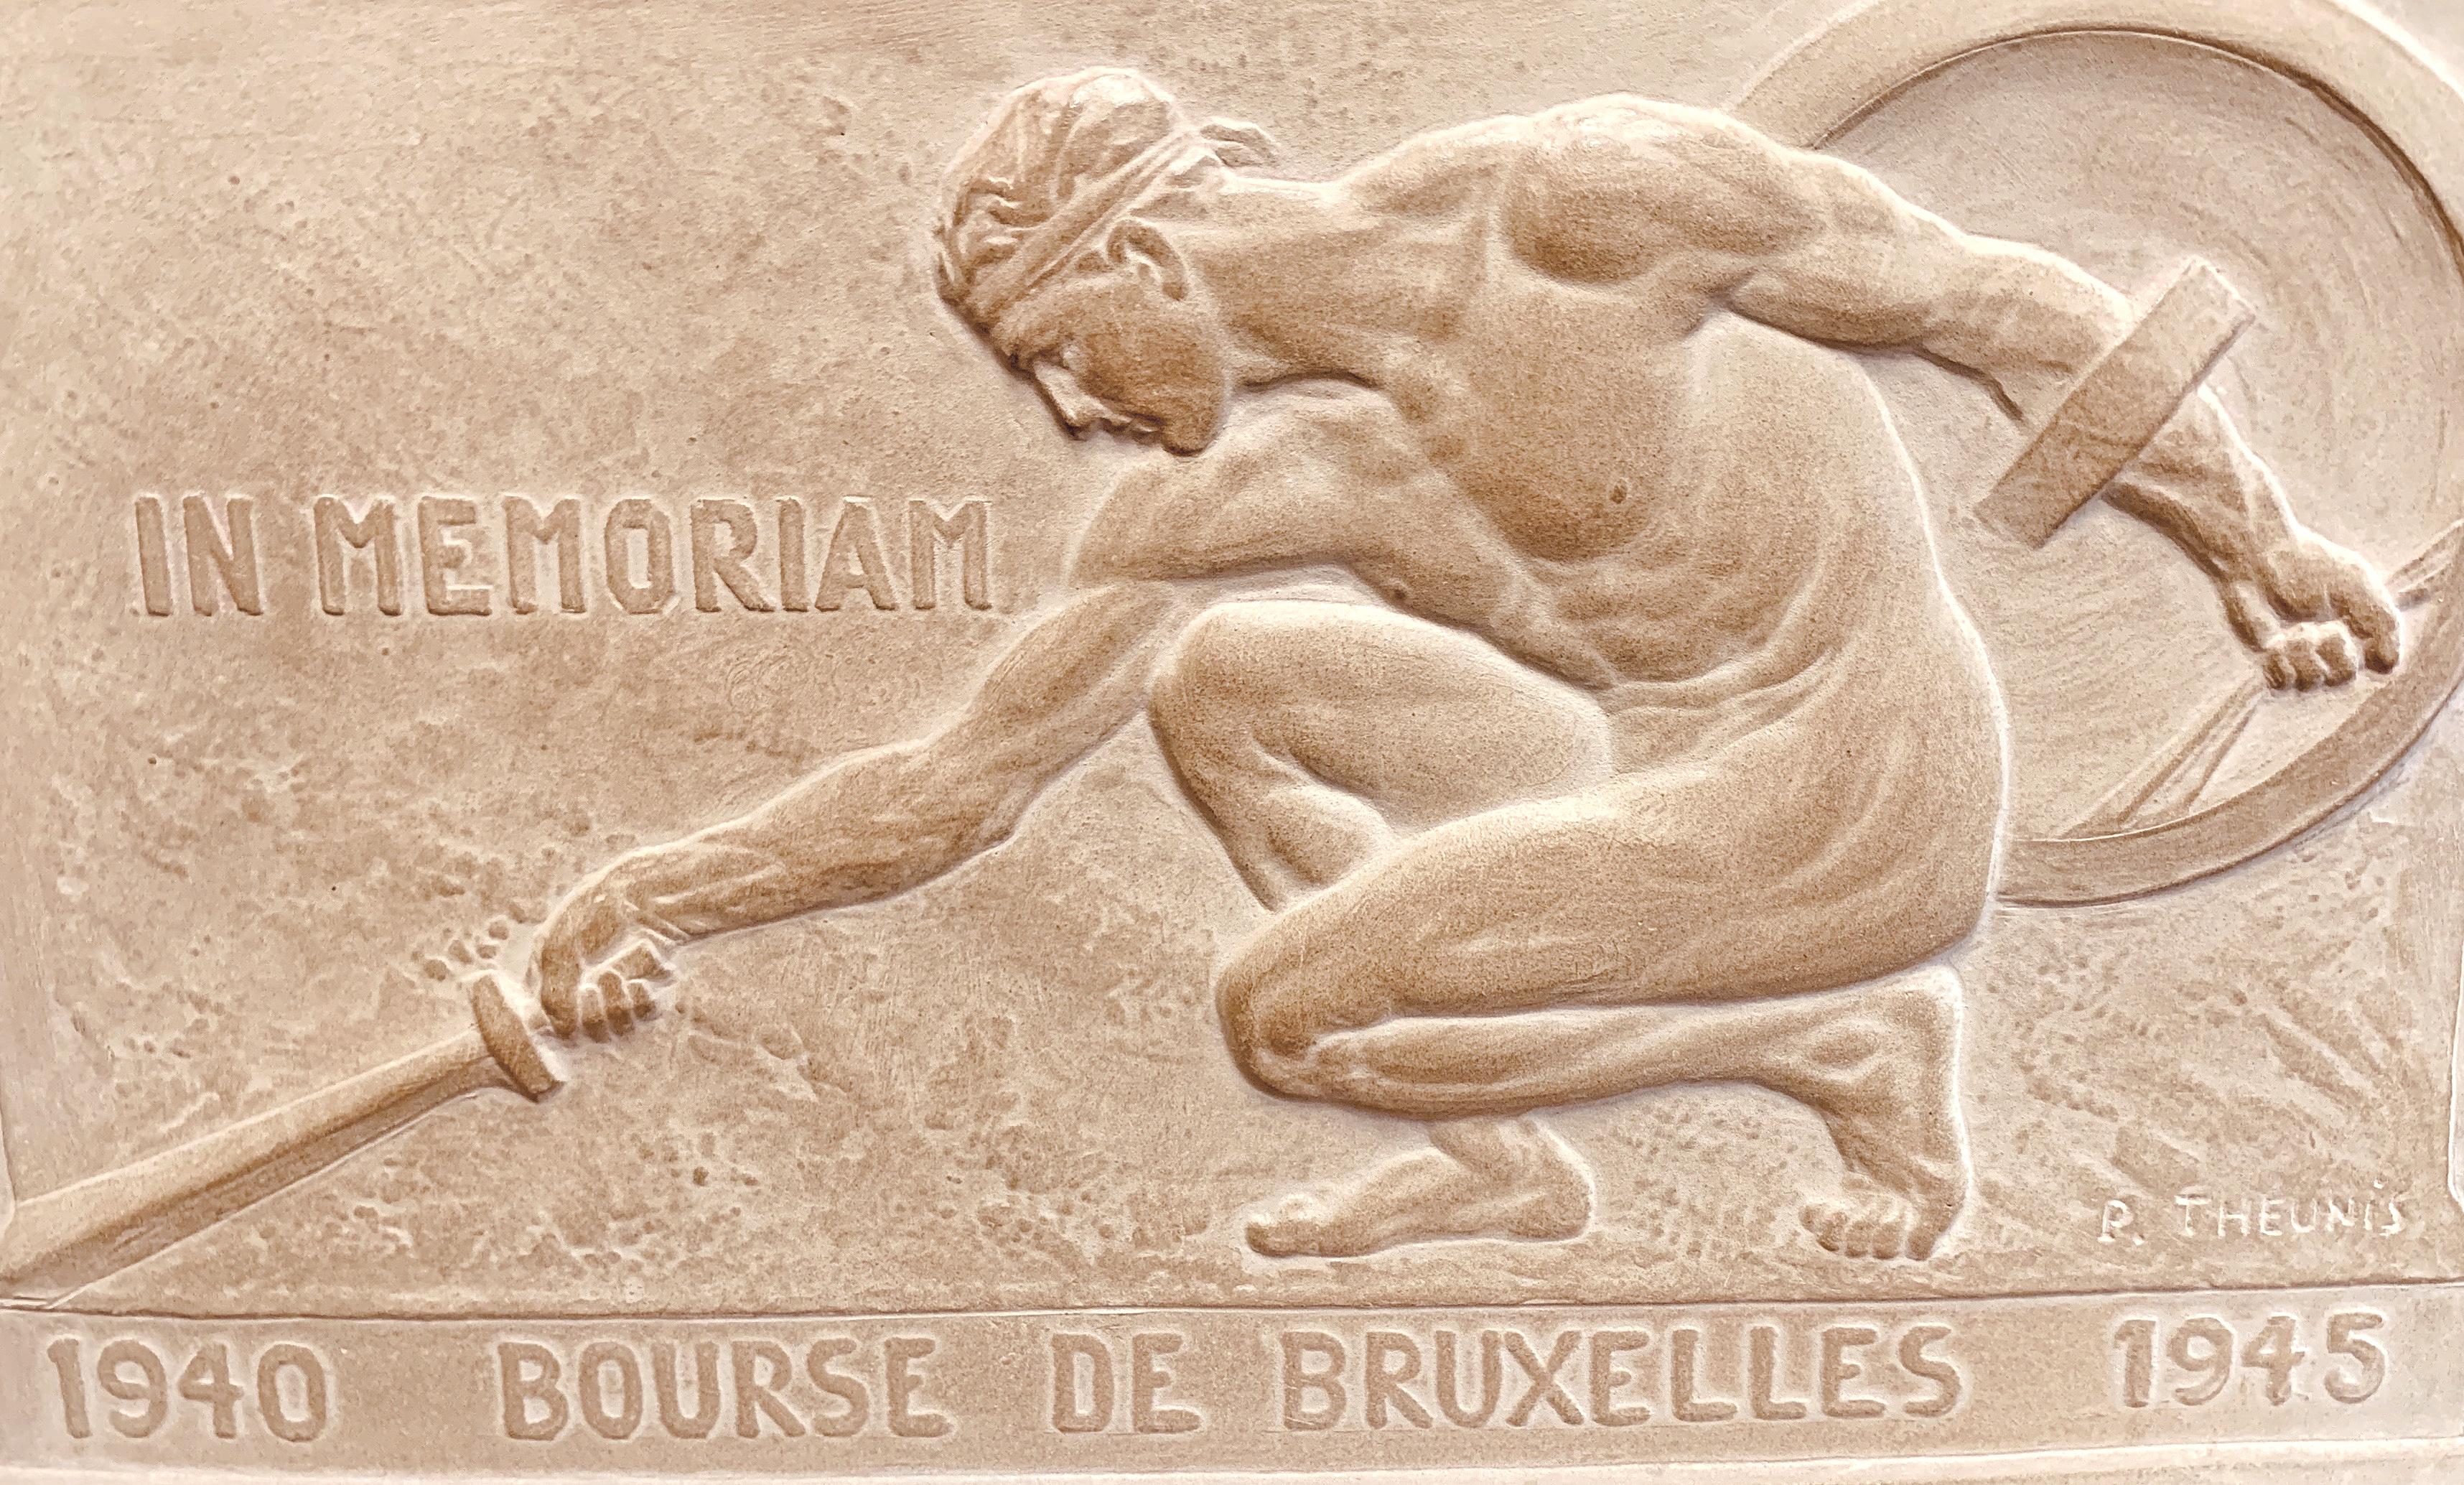 Powerful and moving, this depiction of a nude male gladiator, laying his sword to the ground with his shield behind him, is a beautiful memorial celebrating the end of World War II, 1947. The Belgian sculptor -- Pierre Theunis -- captures the